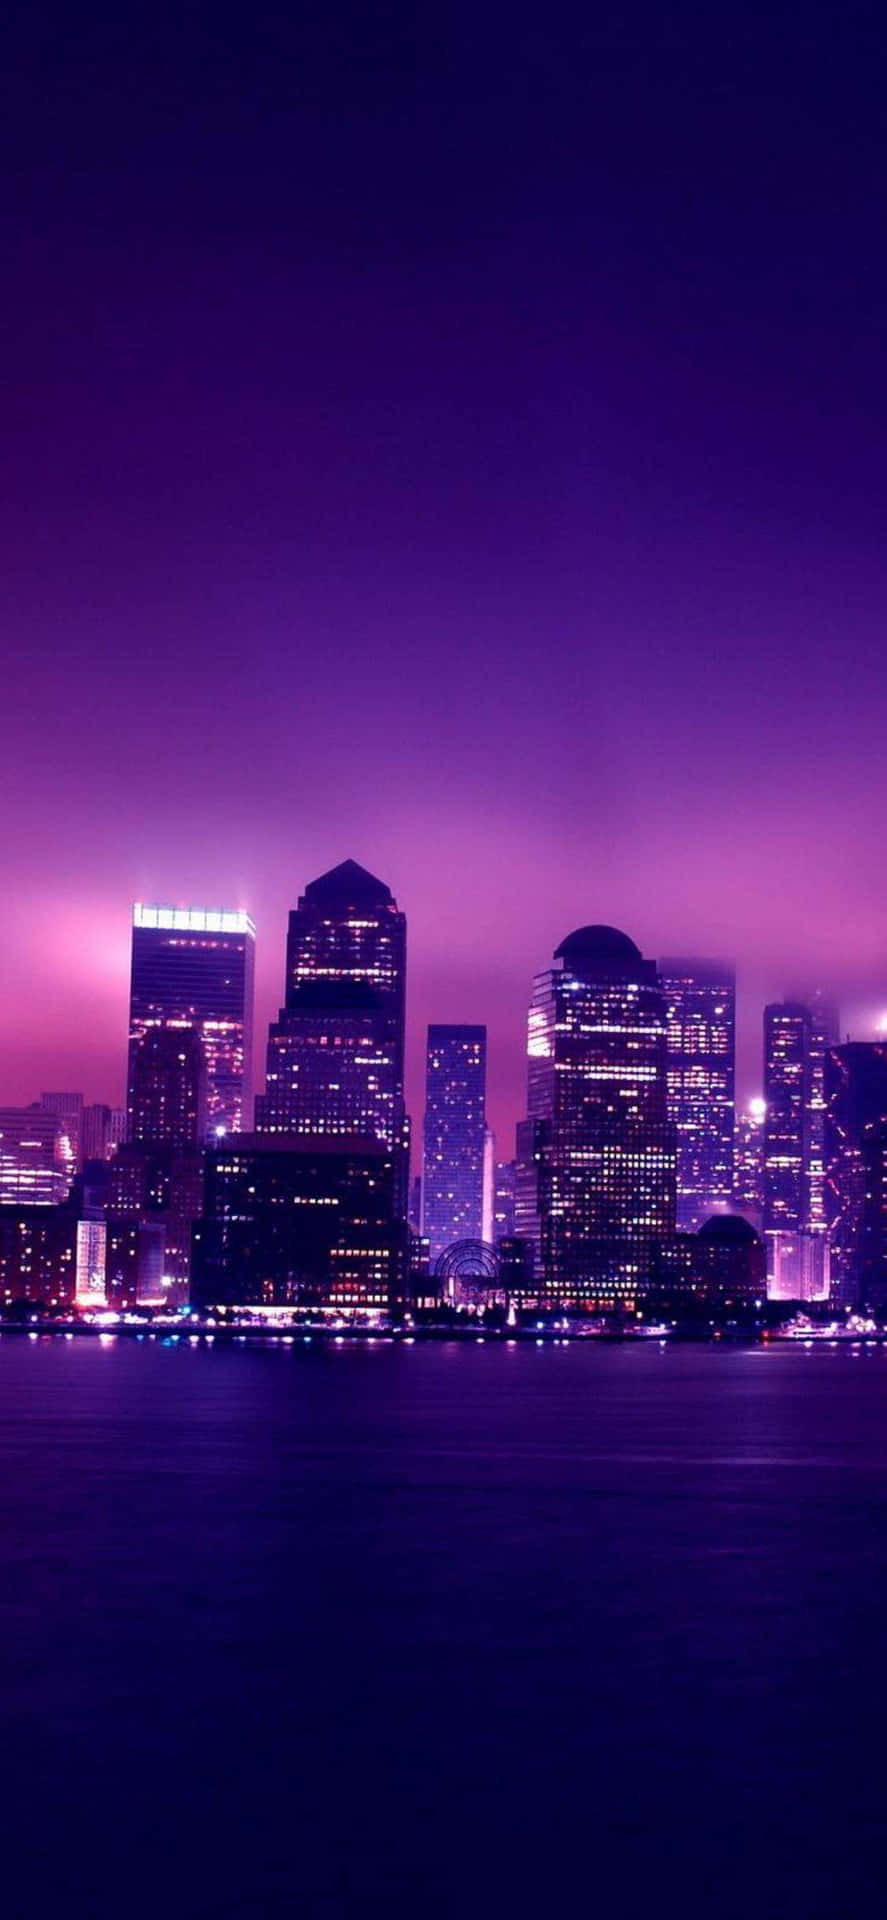 A Purple Skyline With Buildings And Lights Wallpaper